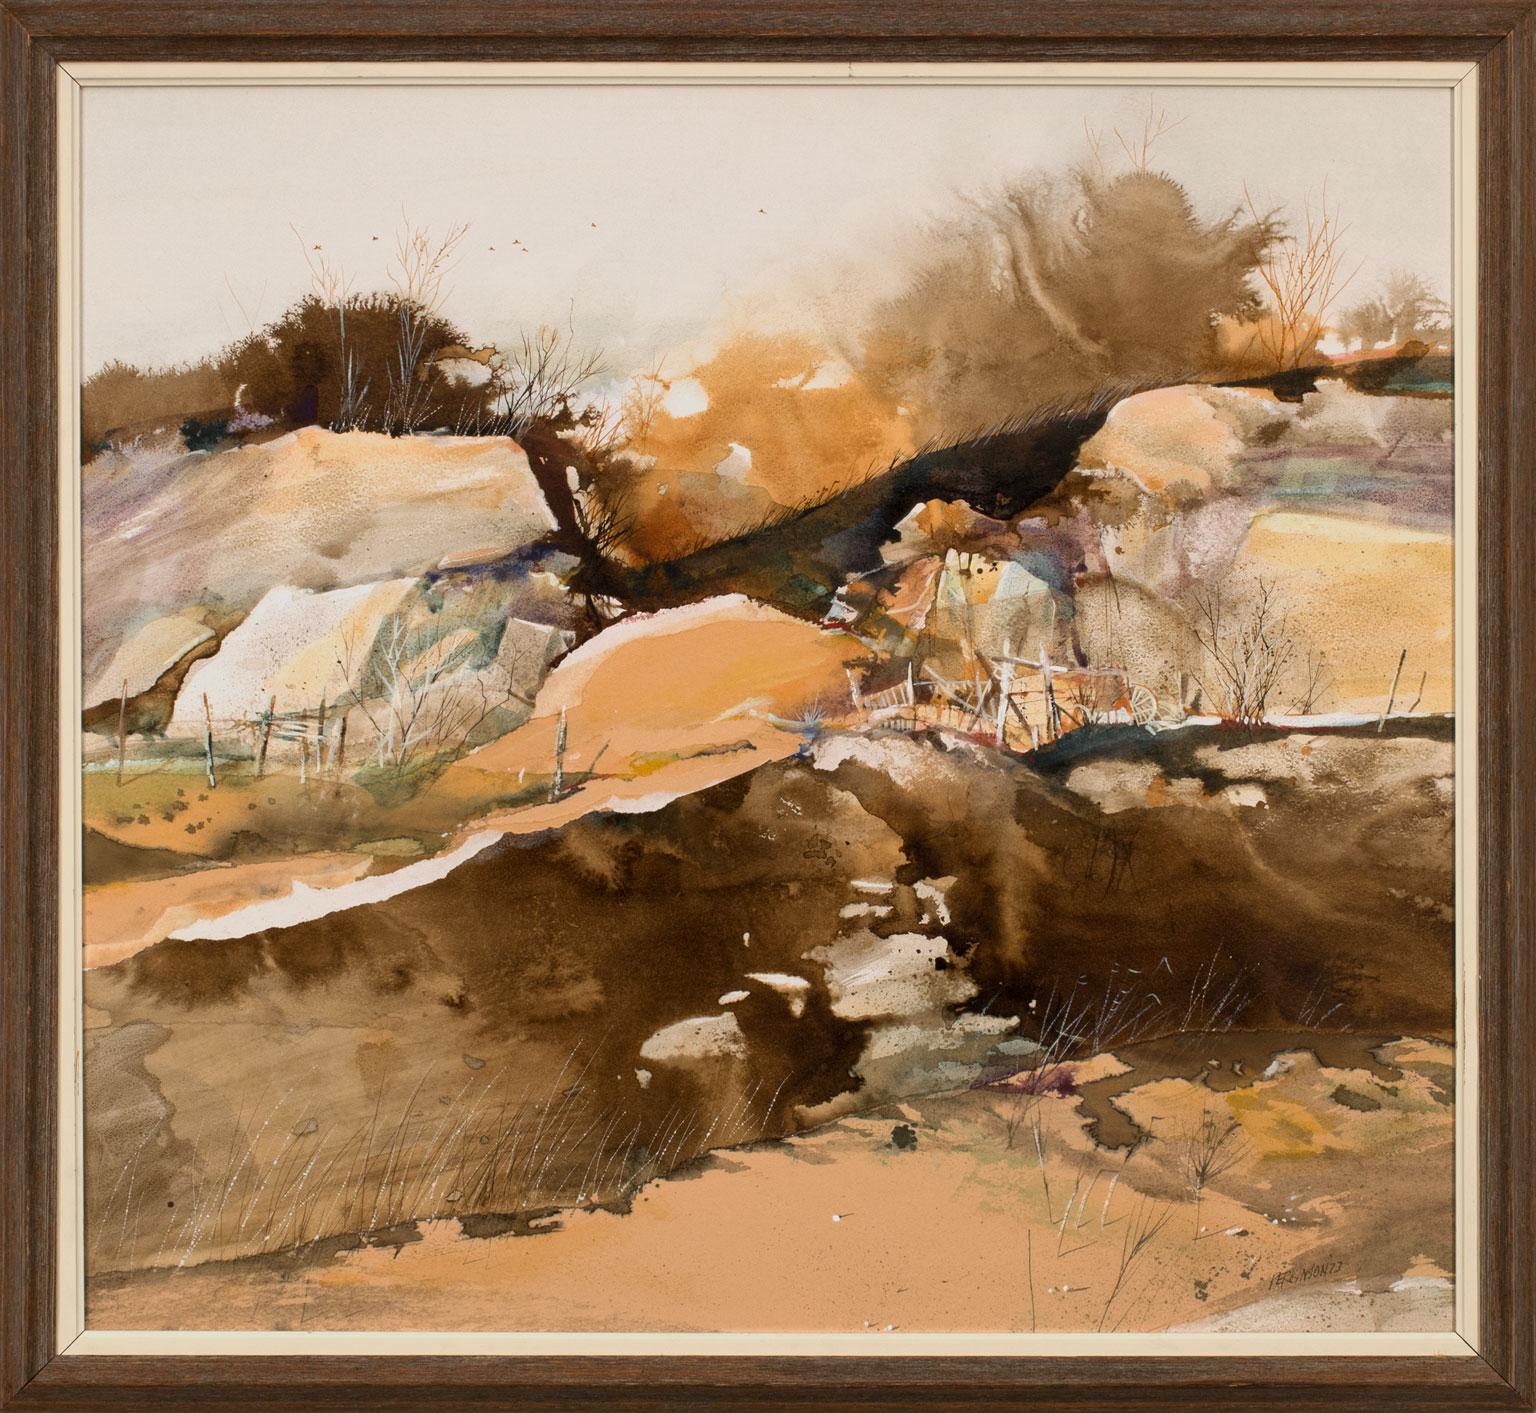 Rare Early Work, Mixed Media on Paper Realist Landscape by Tom Perkinson, Framed